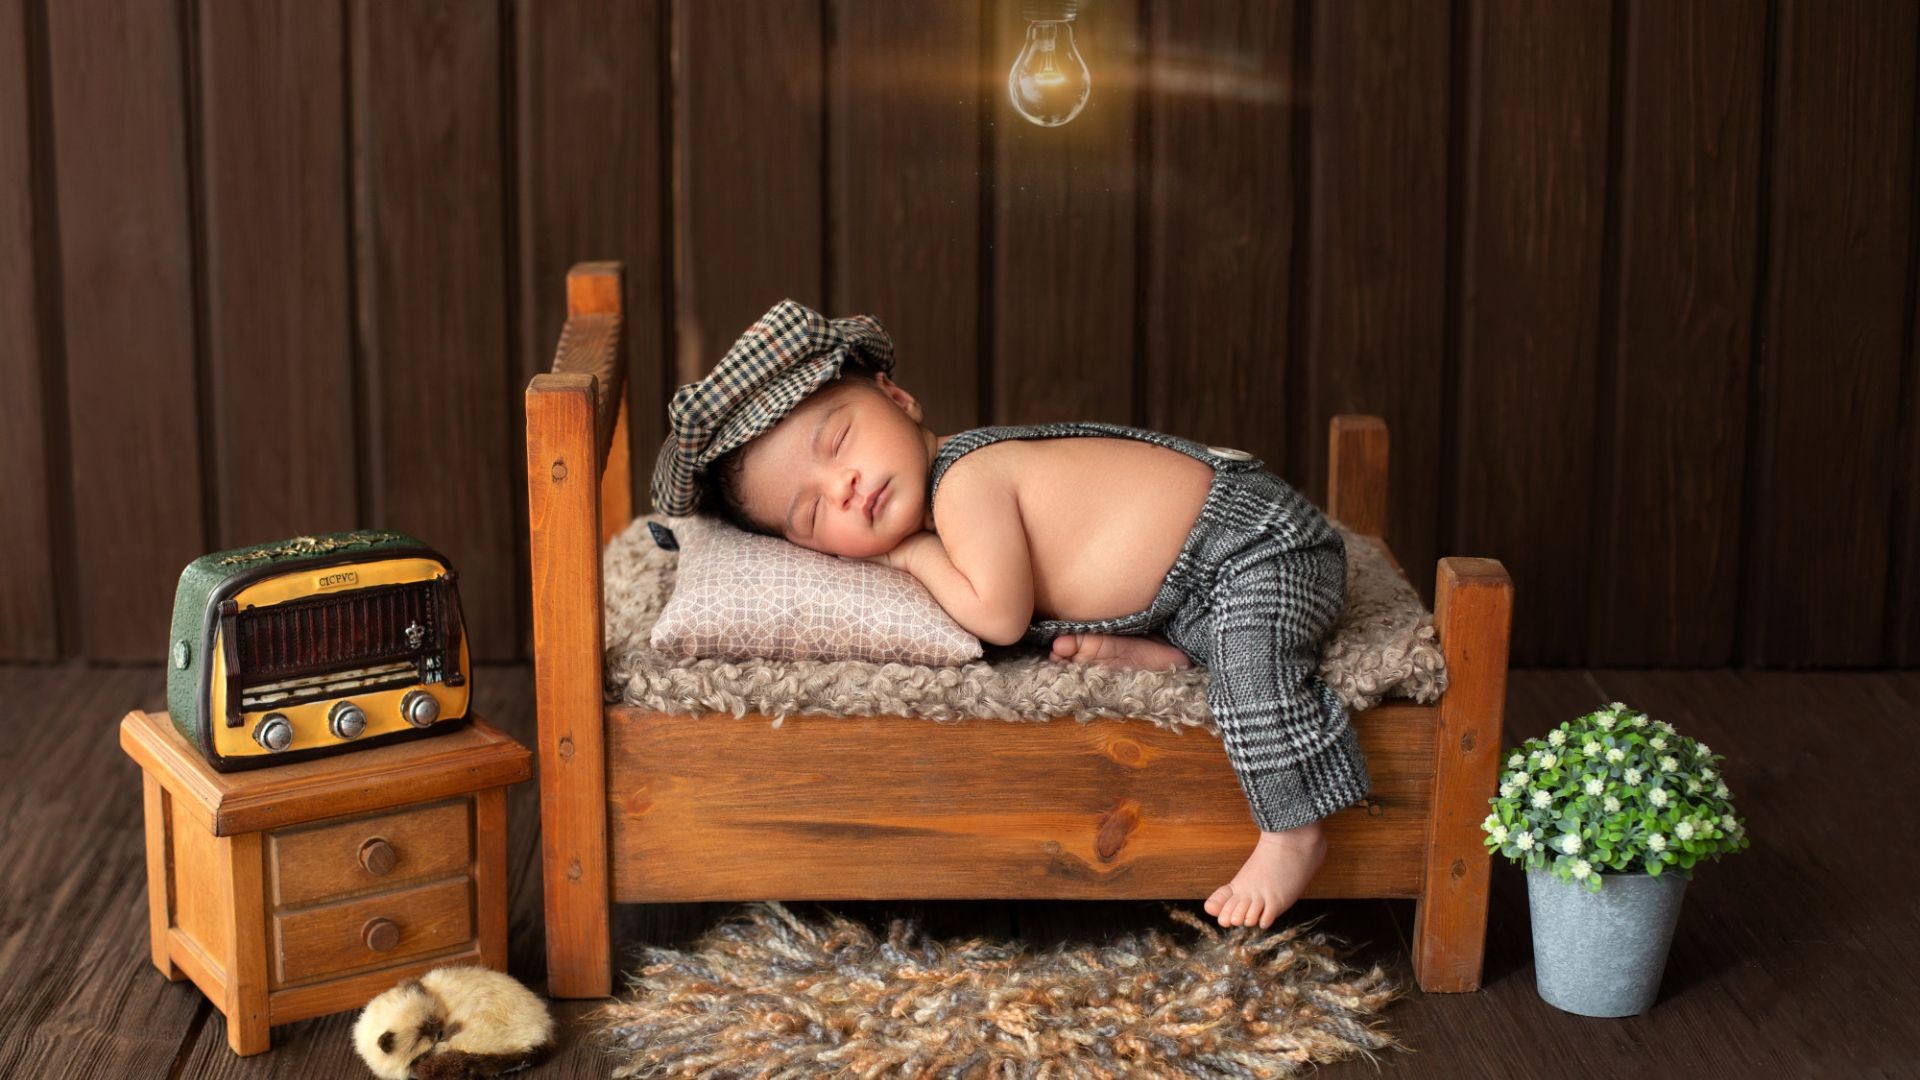 Cute Baby Sleeping Wearing Black White Dress with Hat Photography